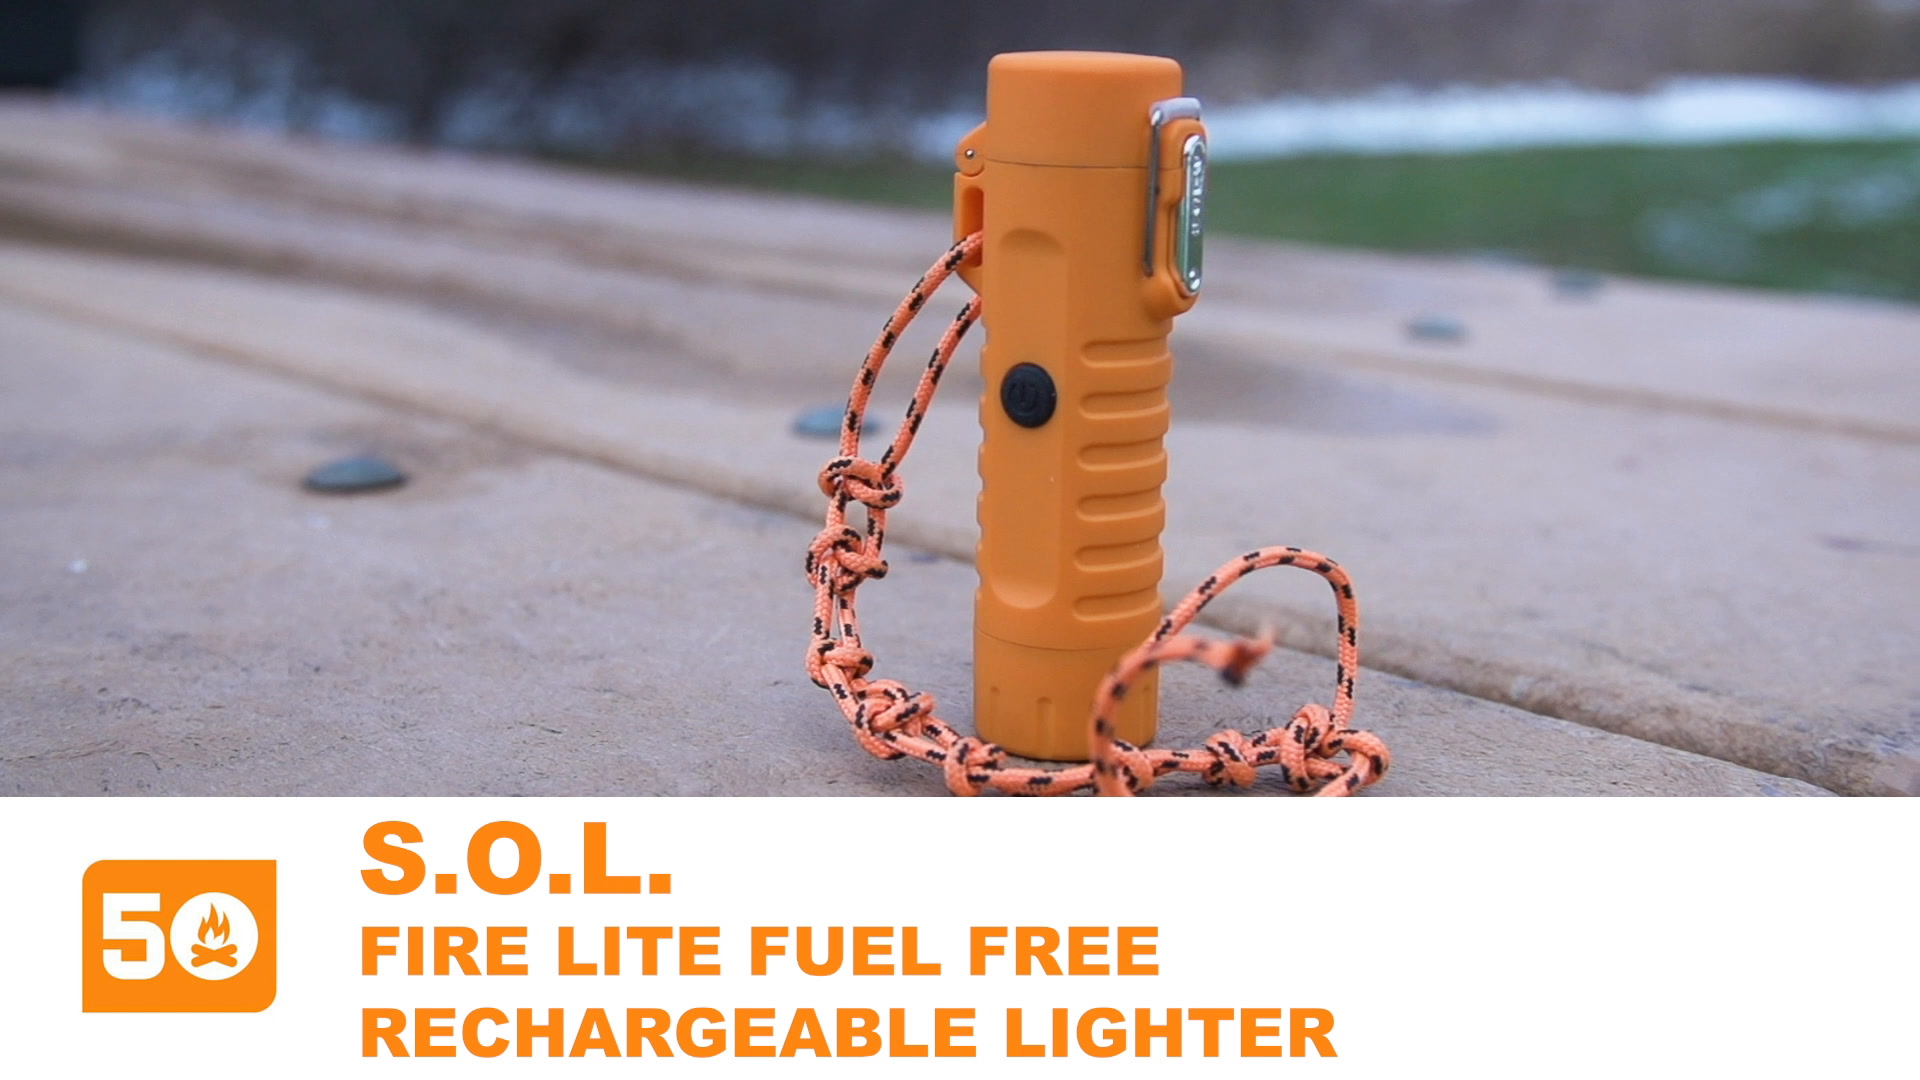 Fire Lite Fuel Free Rechargeable Lighter S.O.L